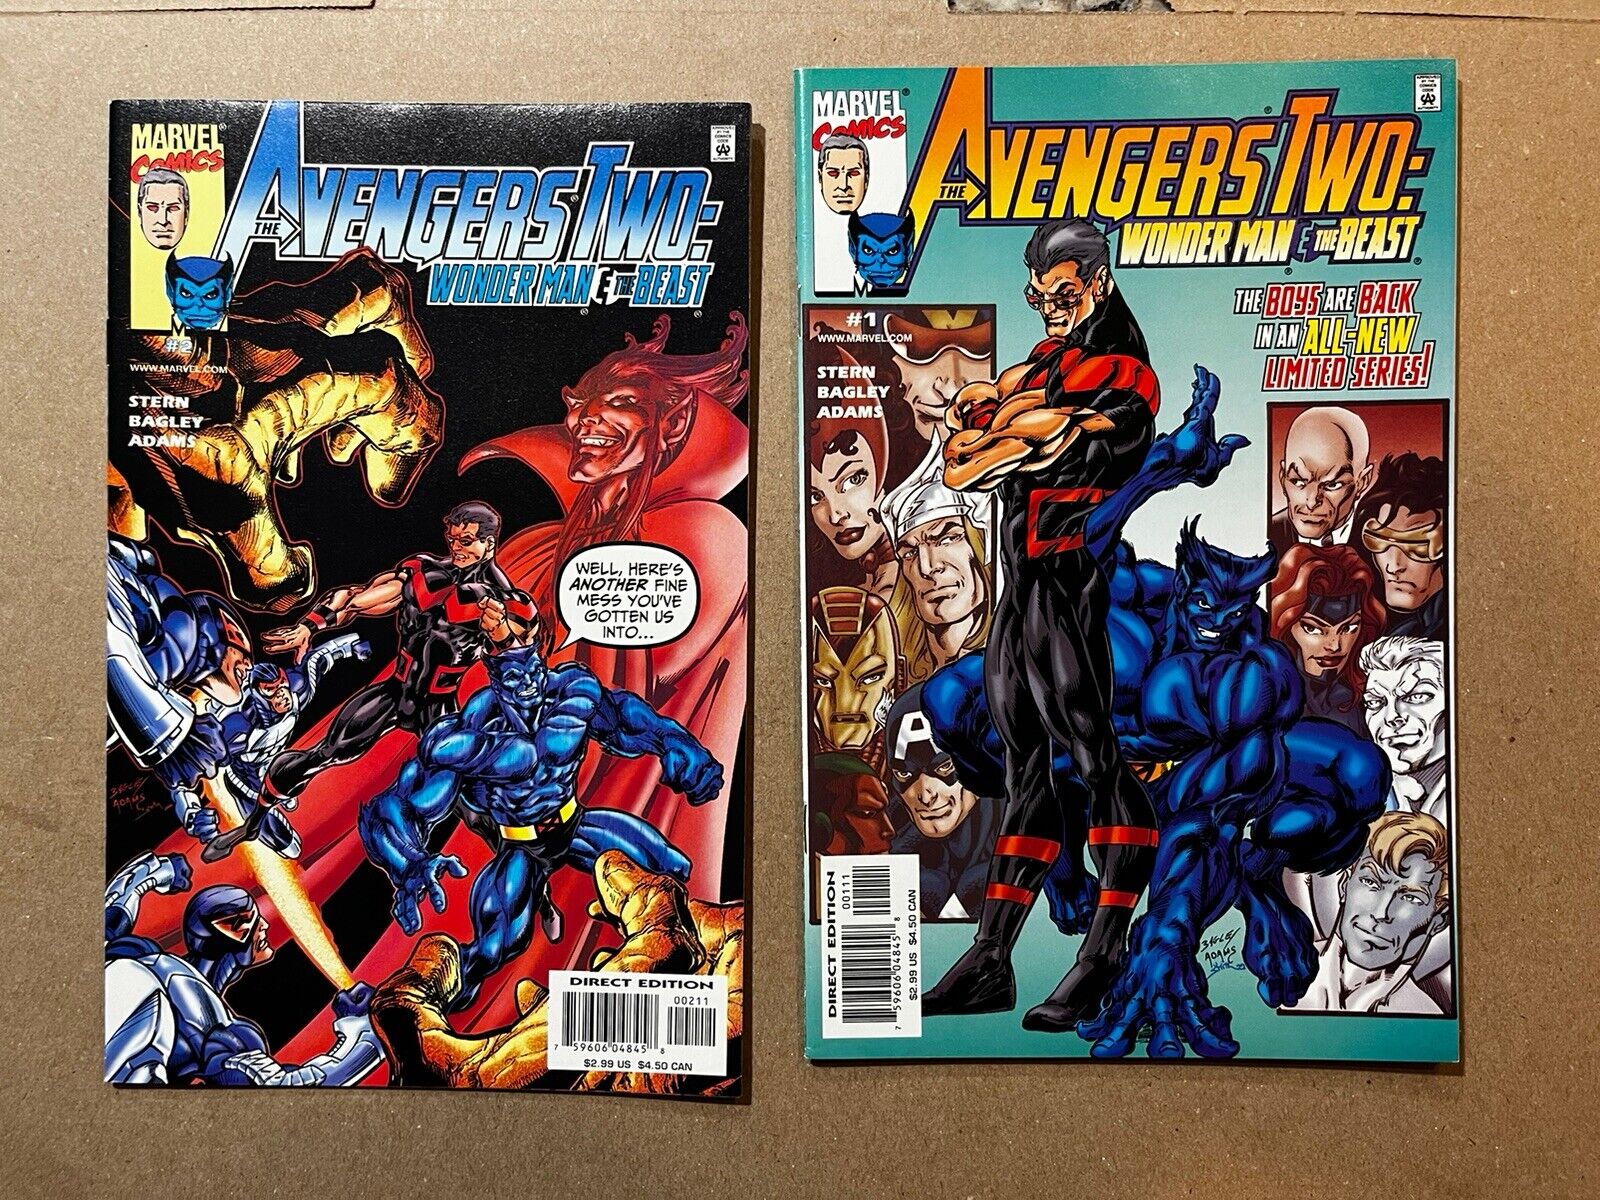 THE AVENGERS TWO WONDER MAN AND THE BEAST #1-2  (NM-) MARVEL COMICS